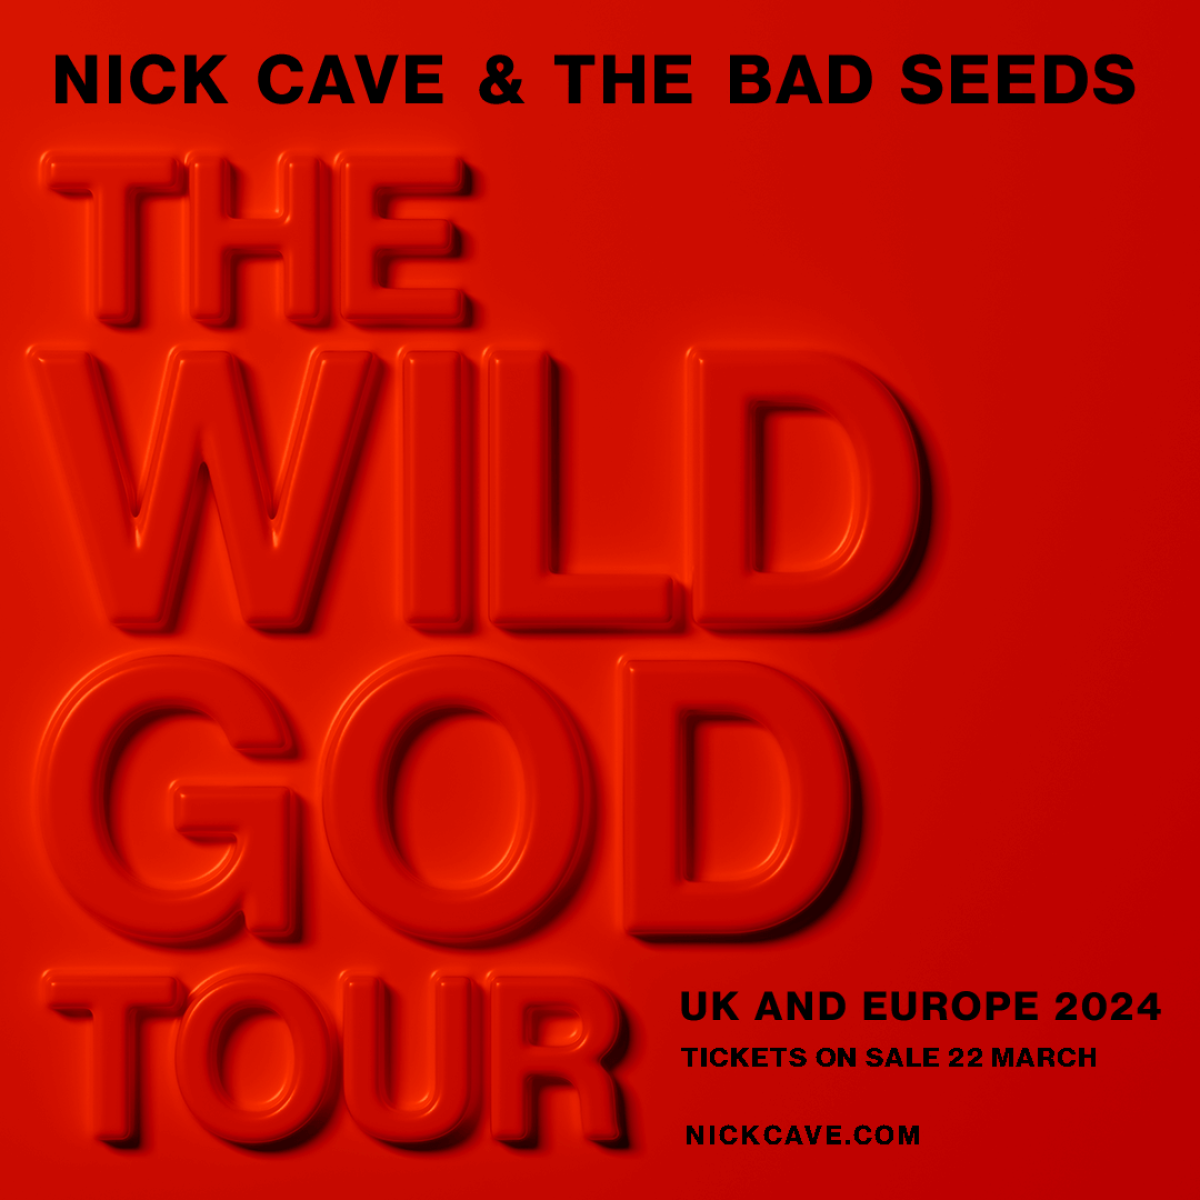 Nick Cave and the Bad Seeds - The Wild God Tour al Uber Arena Tickets